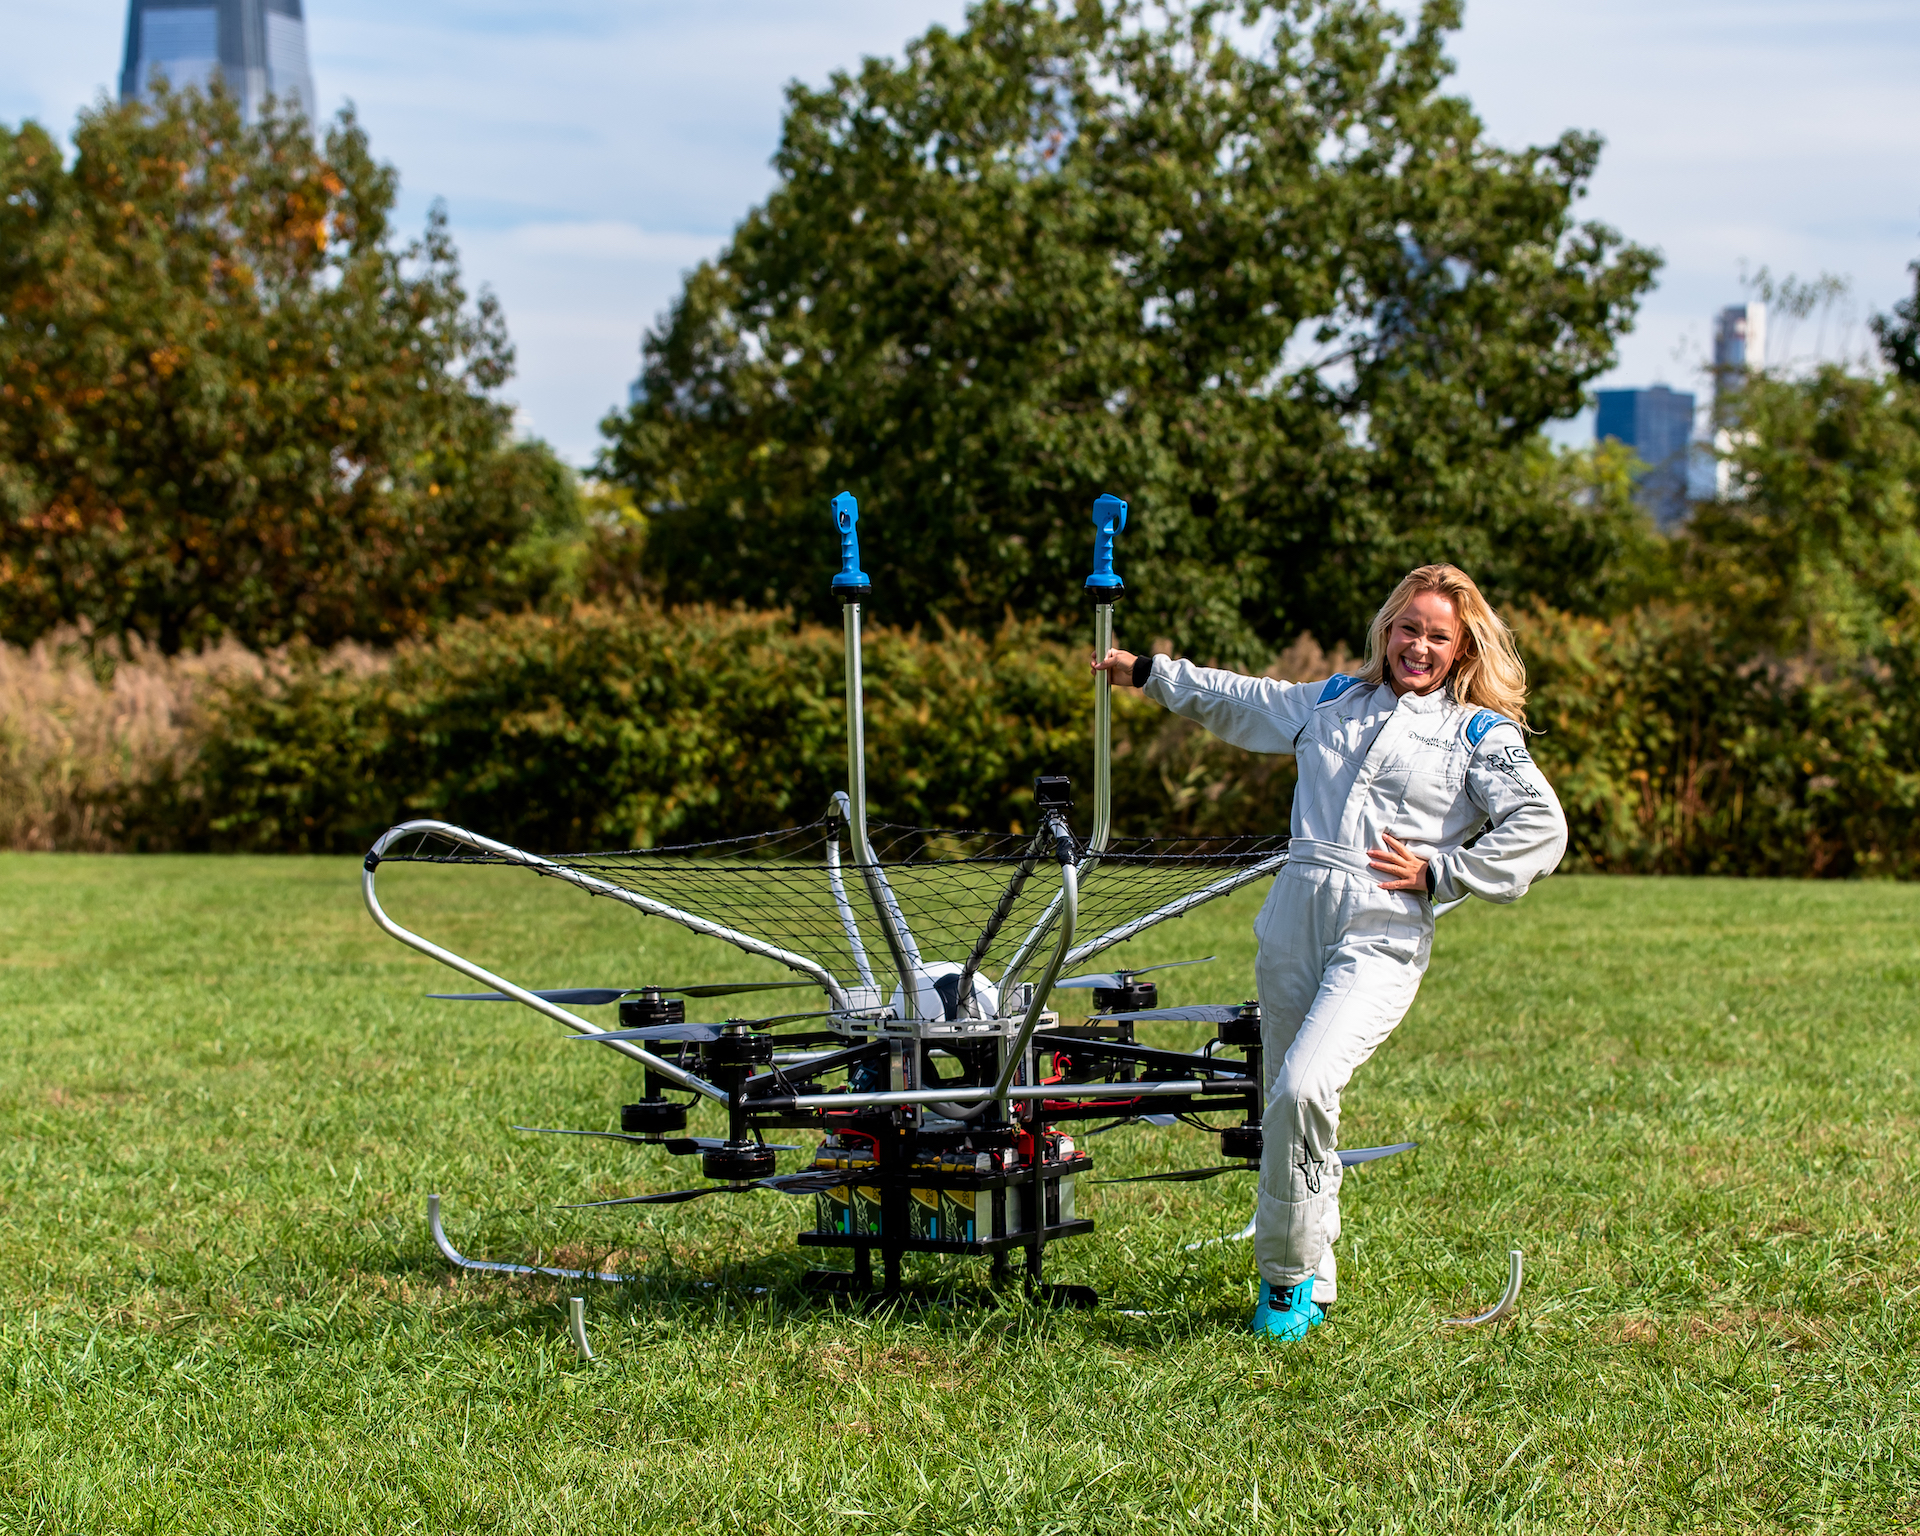 Mariah Cain and her flying machine